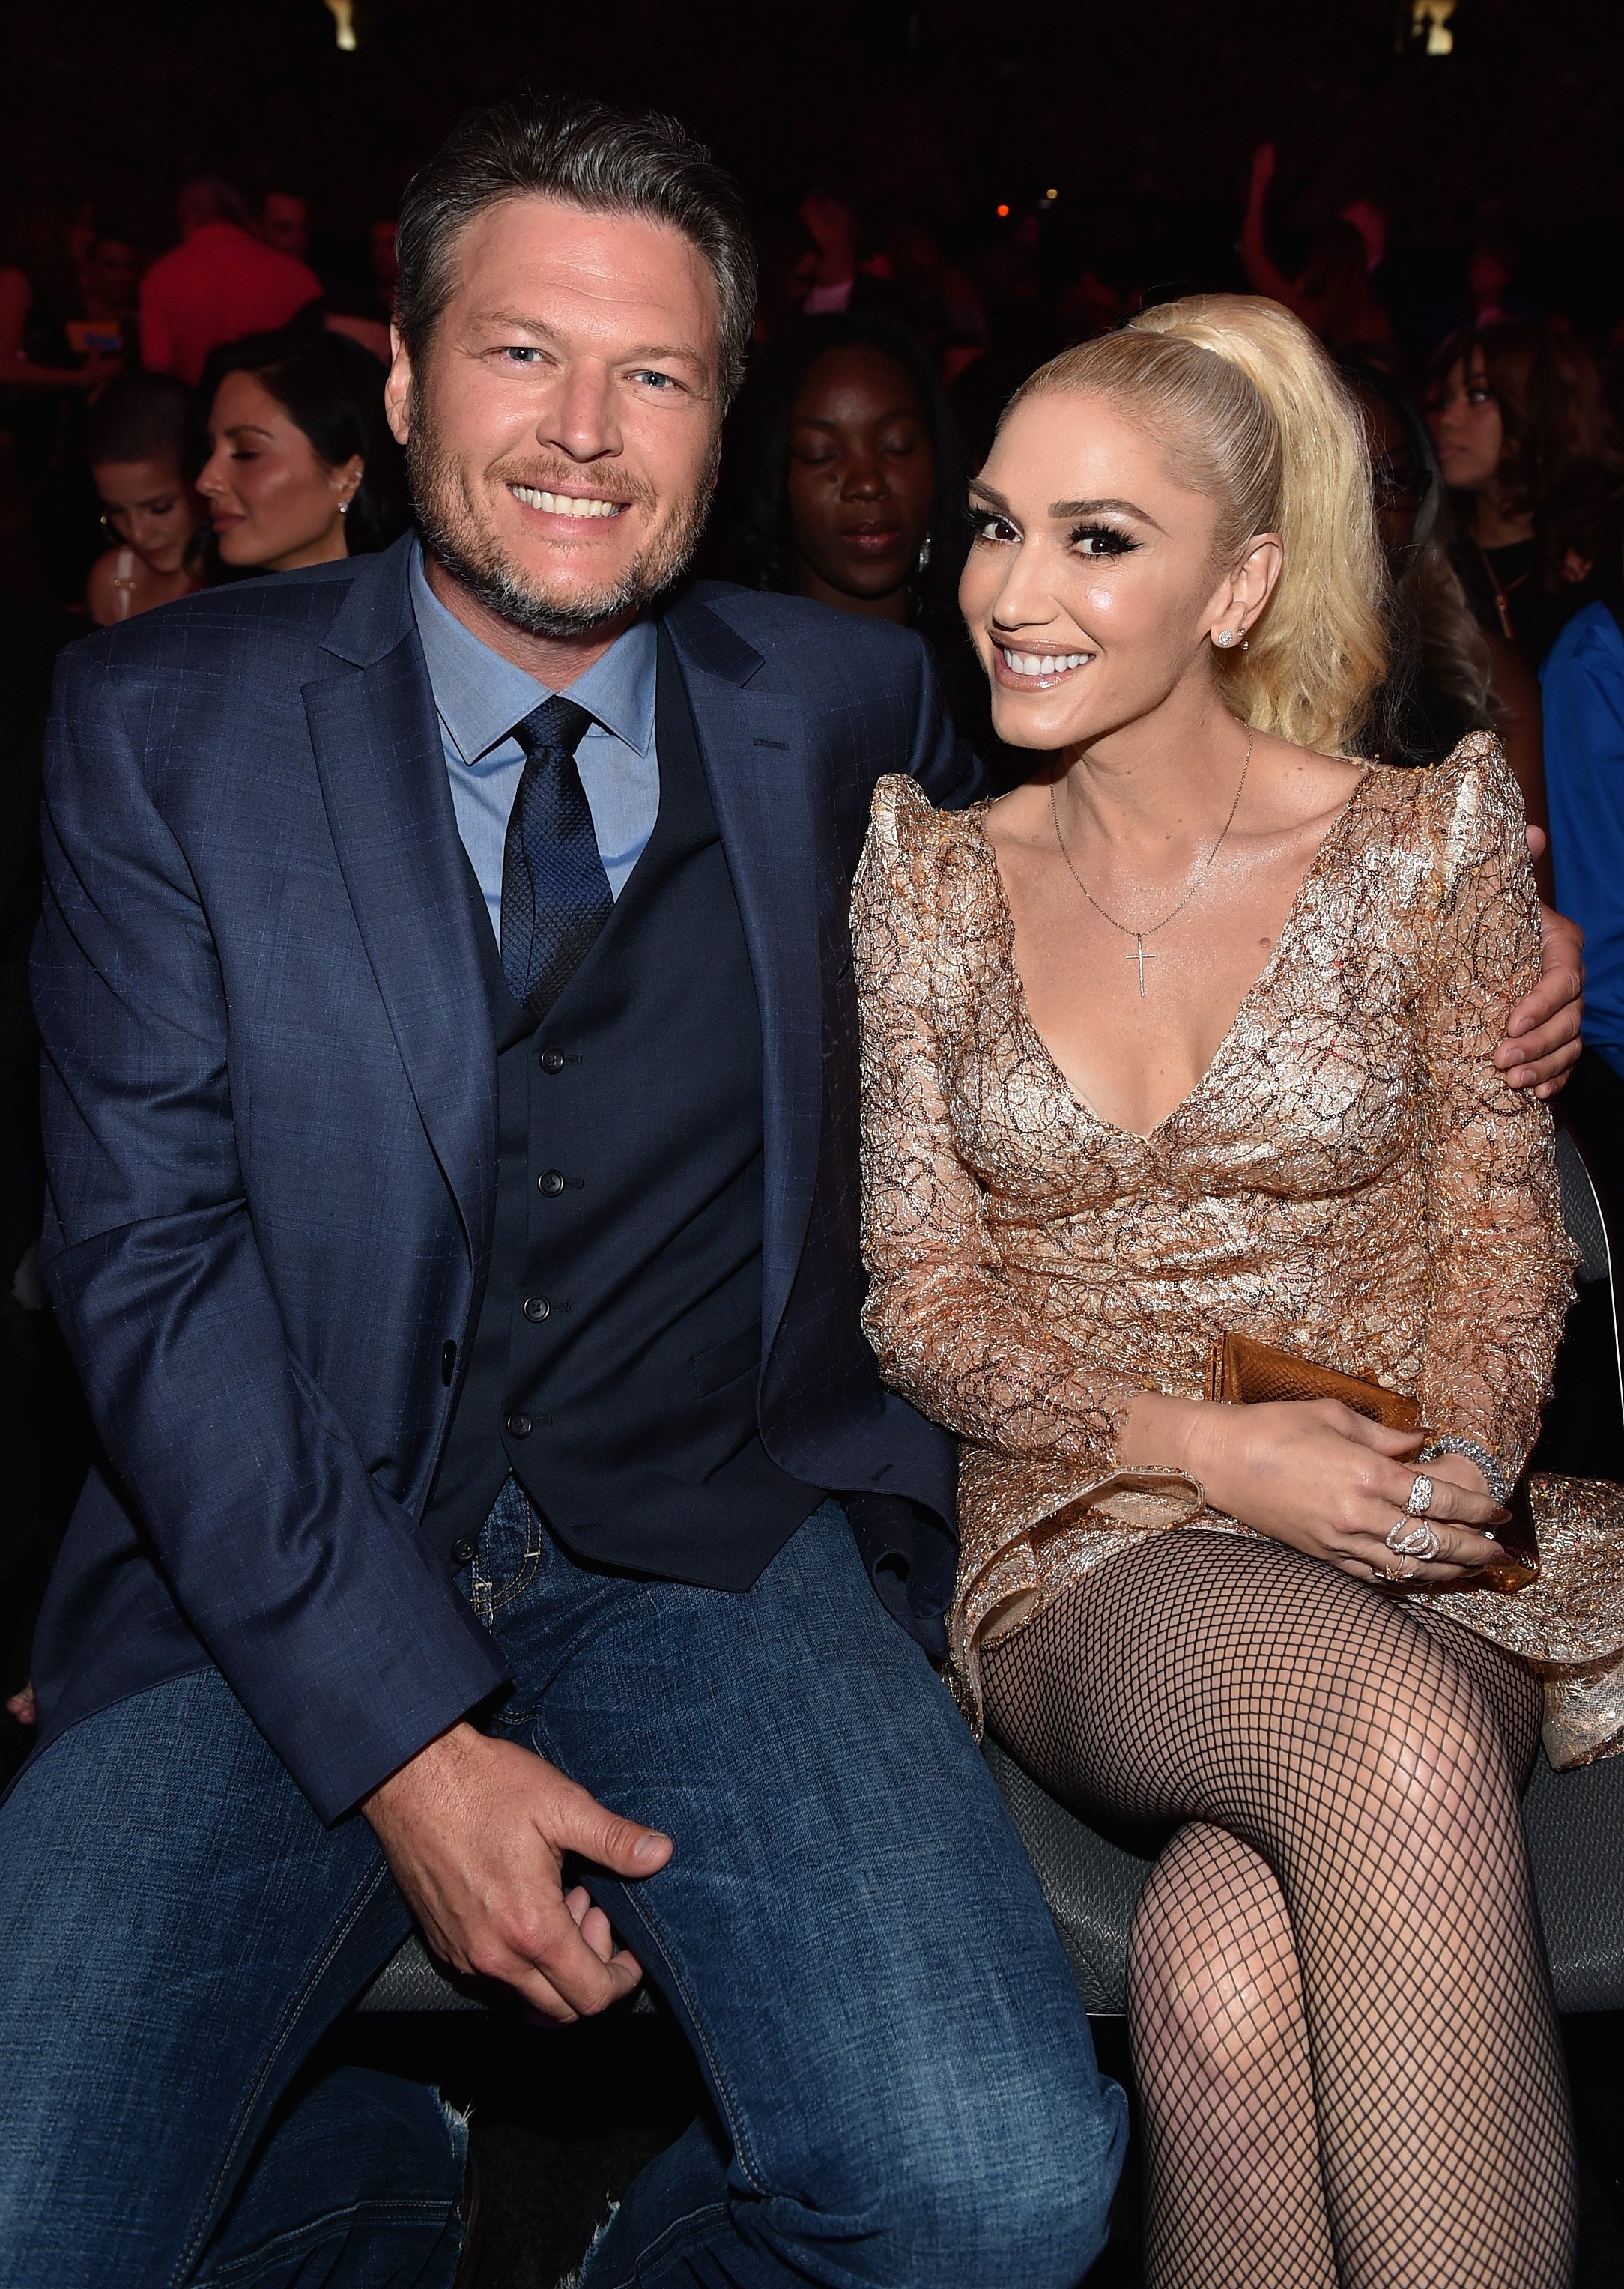 Blake Shelton and Gwen Stefani attend the 2017 Billboard Music Awards. | Source: Getty Images